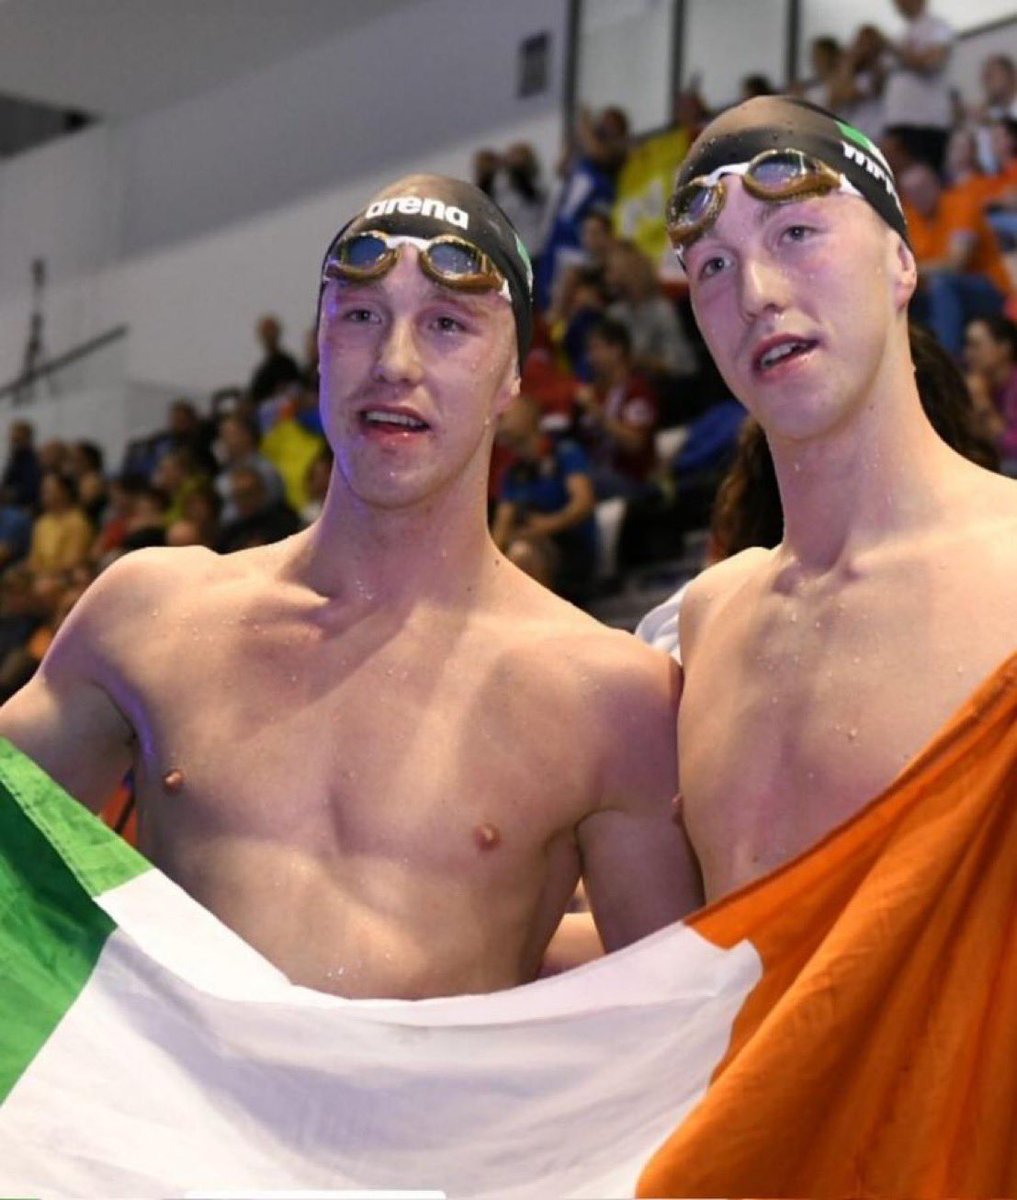 Congratulations to Daniel Wiffen , European Champion on the 1500m Freestyle. He set a new Irish record in 14.09.11, creeping ever closer to the WR!! Further congratulations to Nathan Wiffen posting a PB in the final. A great moment for them both!